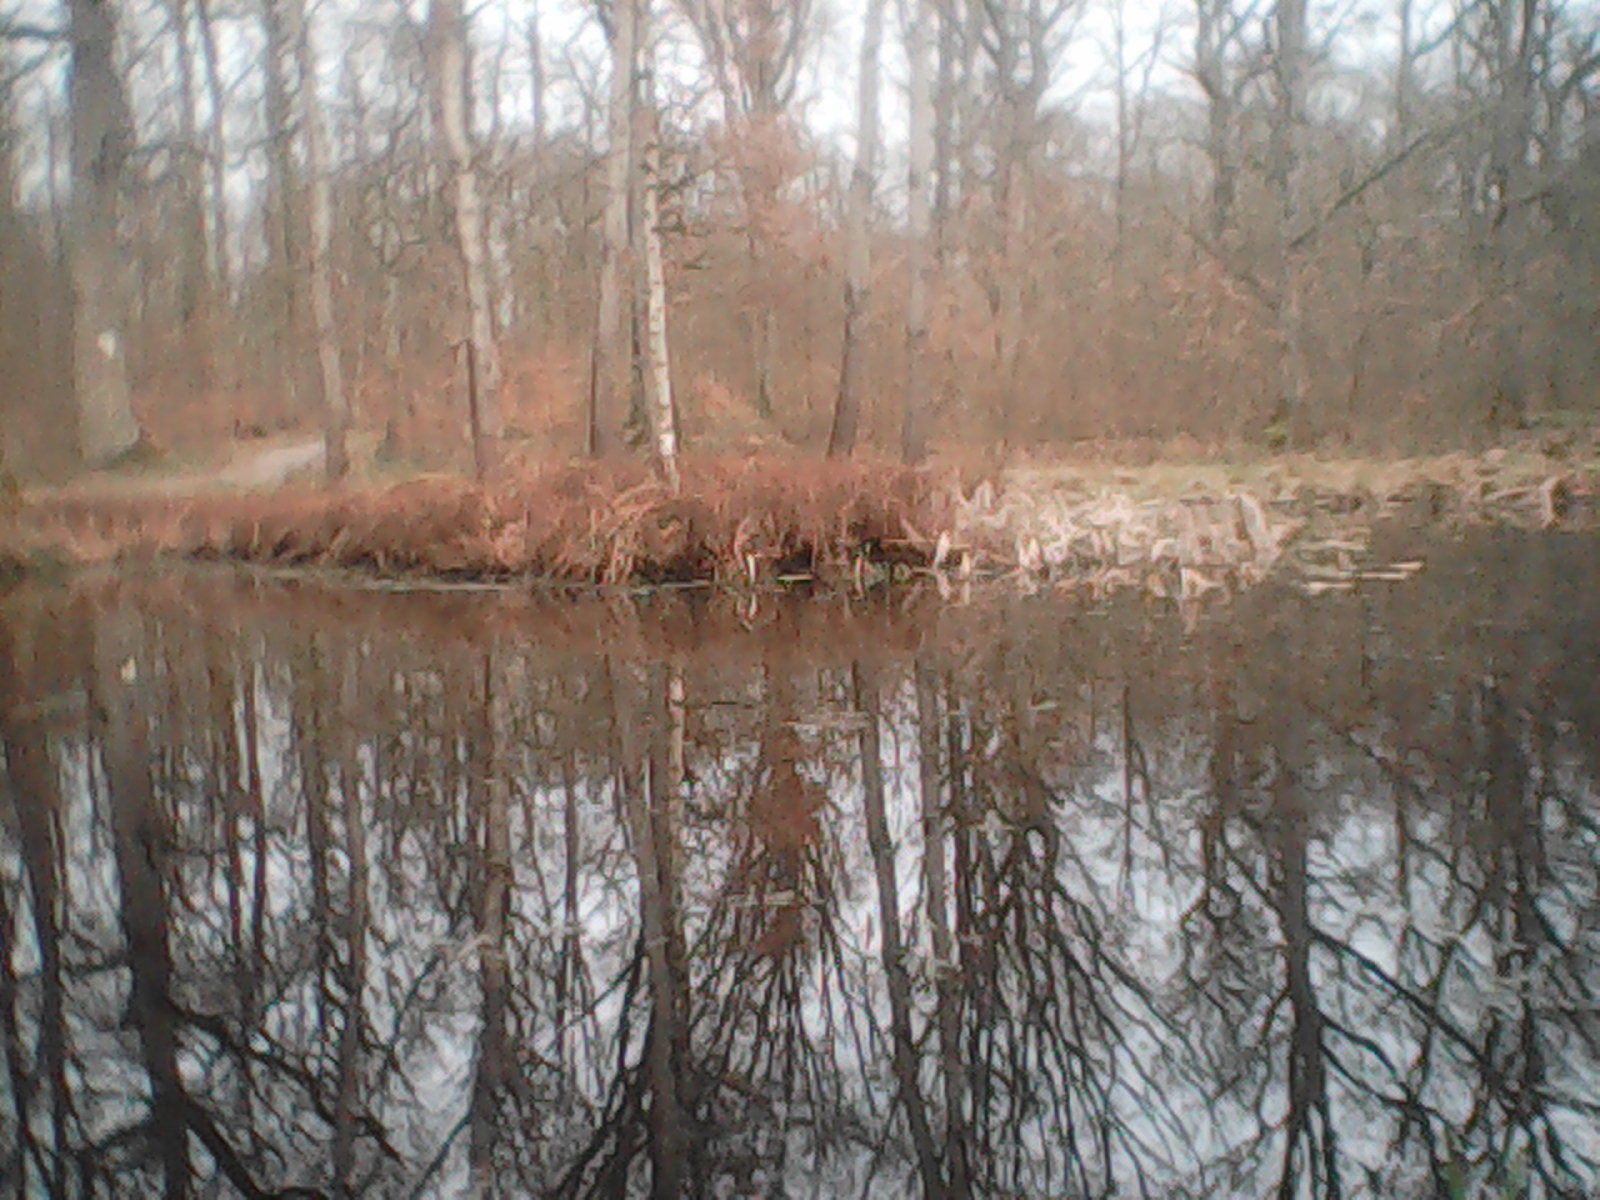 A brown lake; trees are mirrored within the water.